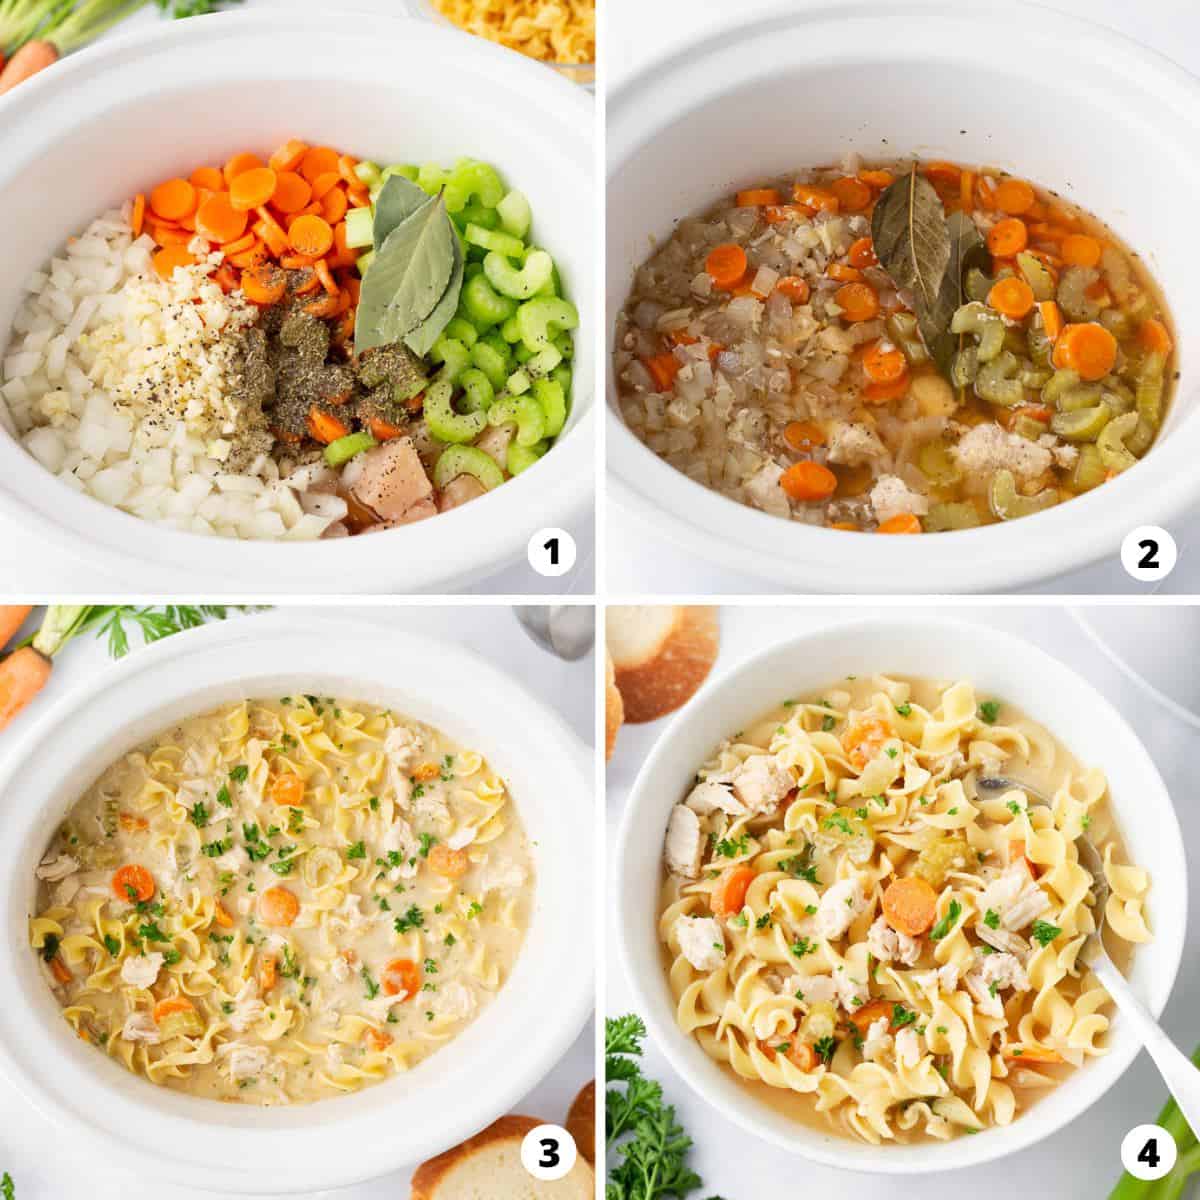 Showing how to make crockpot chicken noodle soup in a 4 step collage.